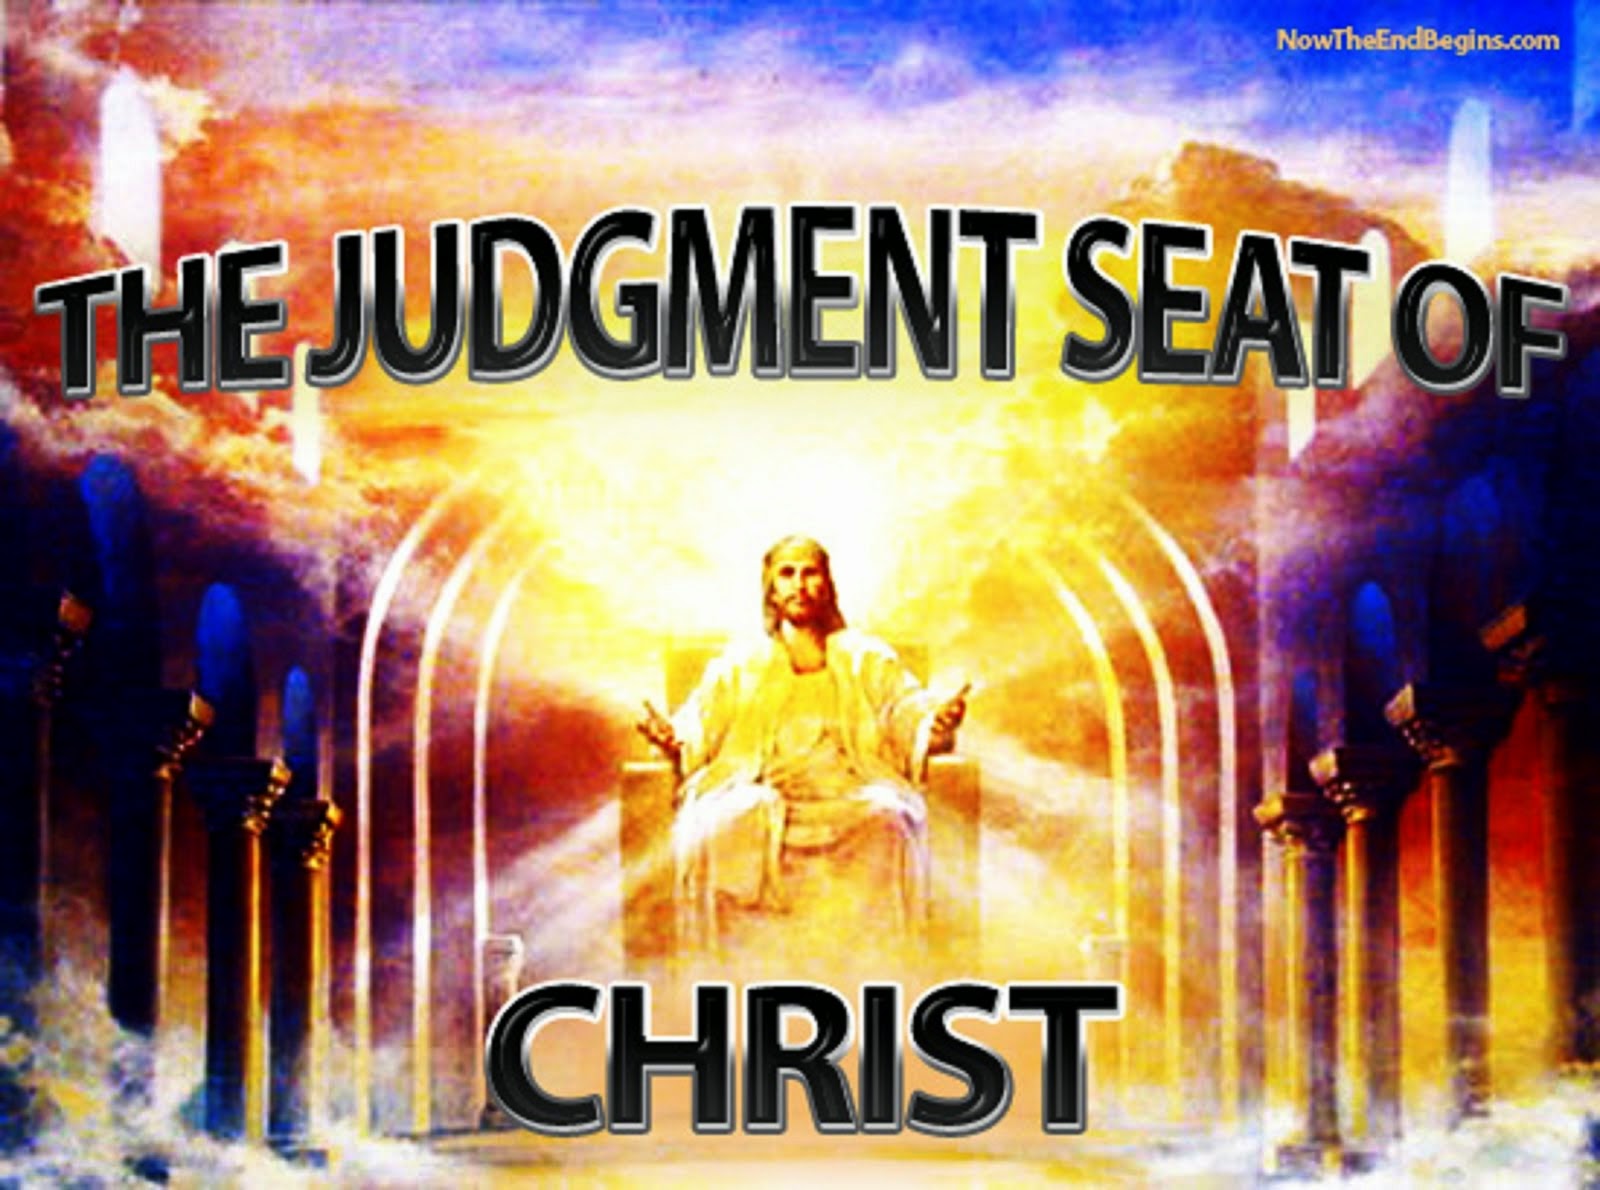 THE JUDGEMENT SEAT OF CHRIST - FOR THE REDEEMED OF THE EARTH